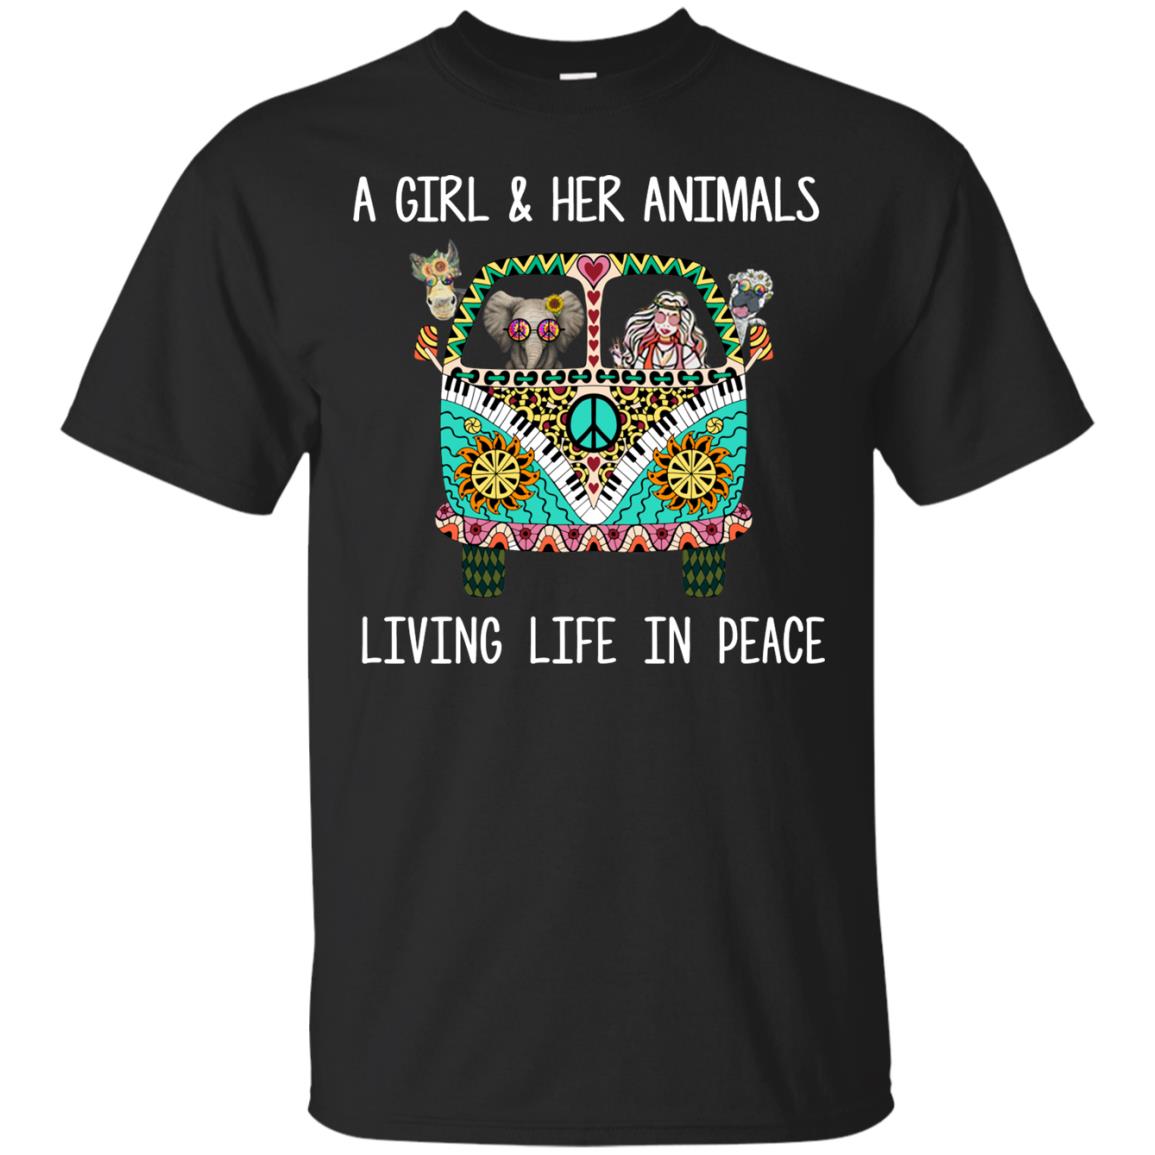 A girl and her animals living life in peace t shirt F07